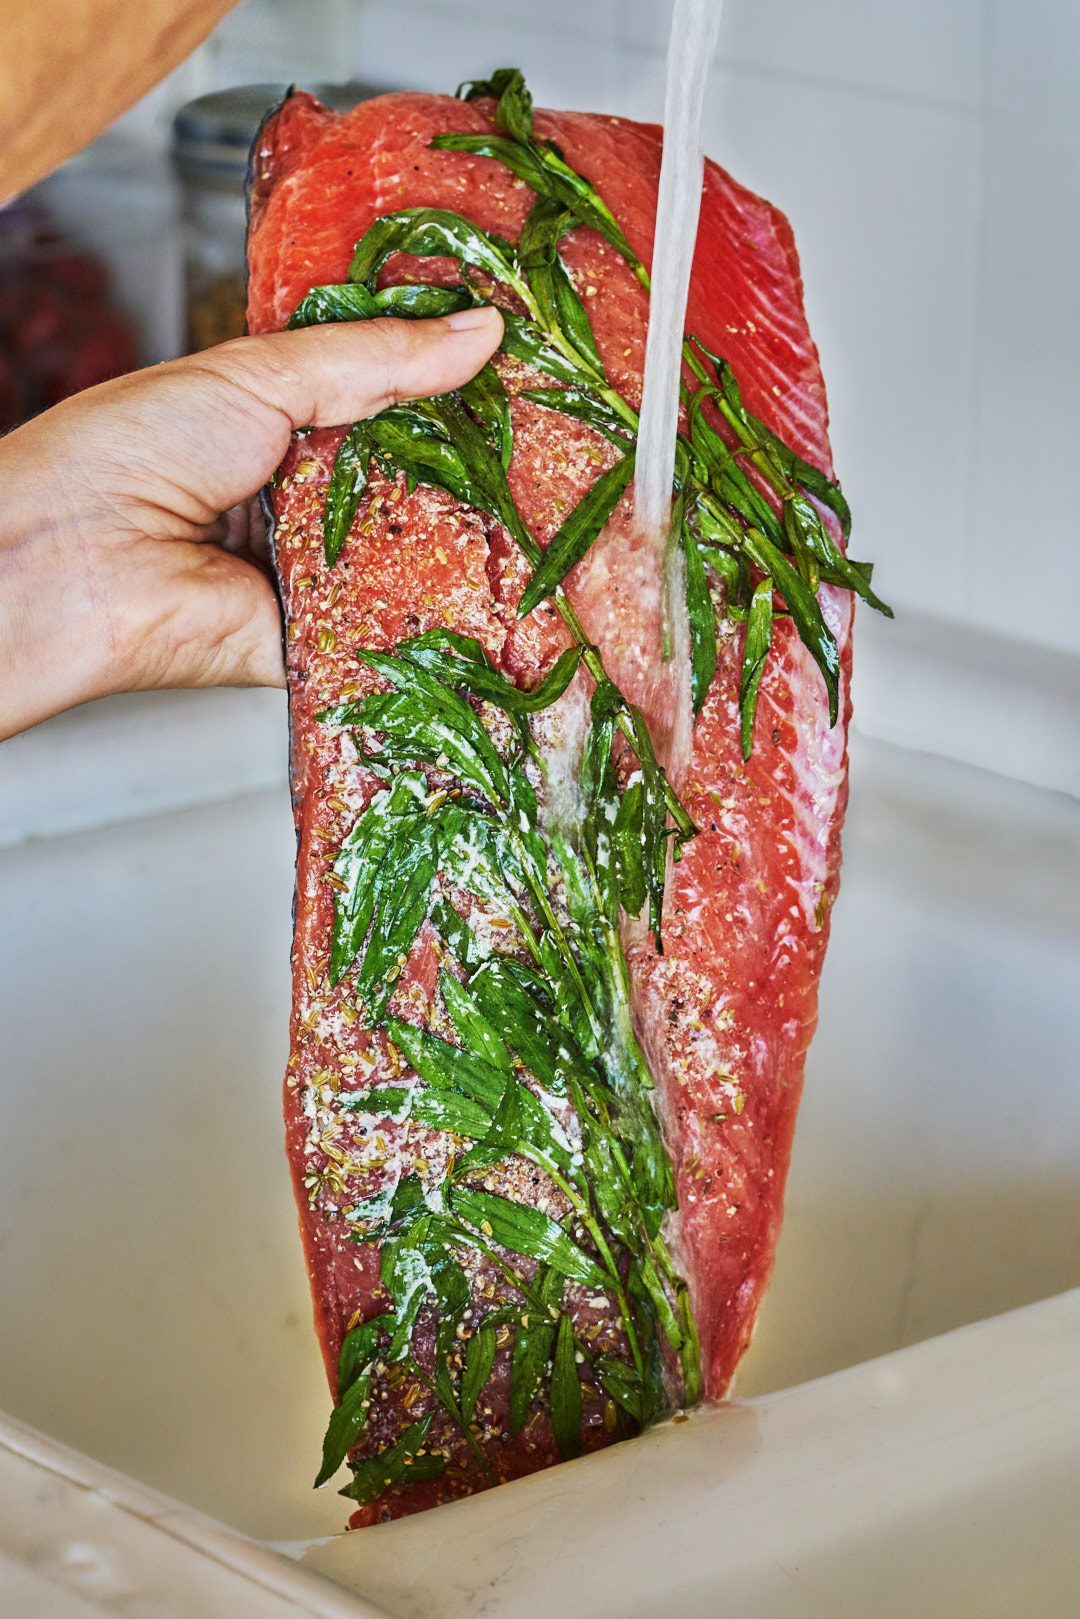 A hand rinsing spices and greens off a large piece of salmon under a faucet.